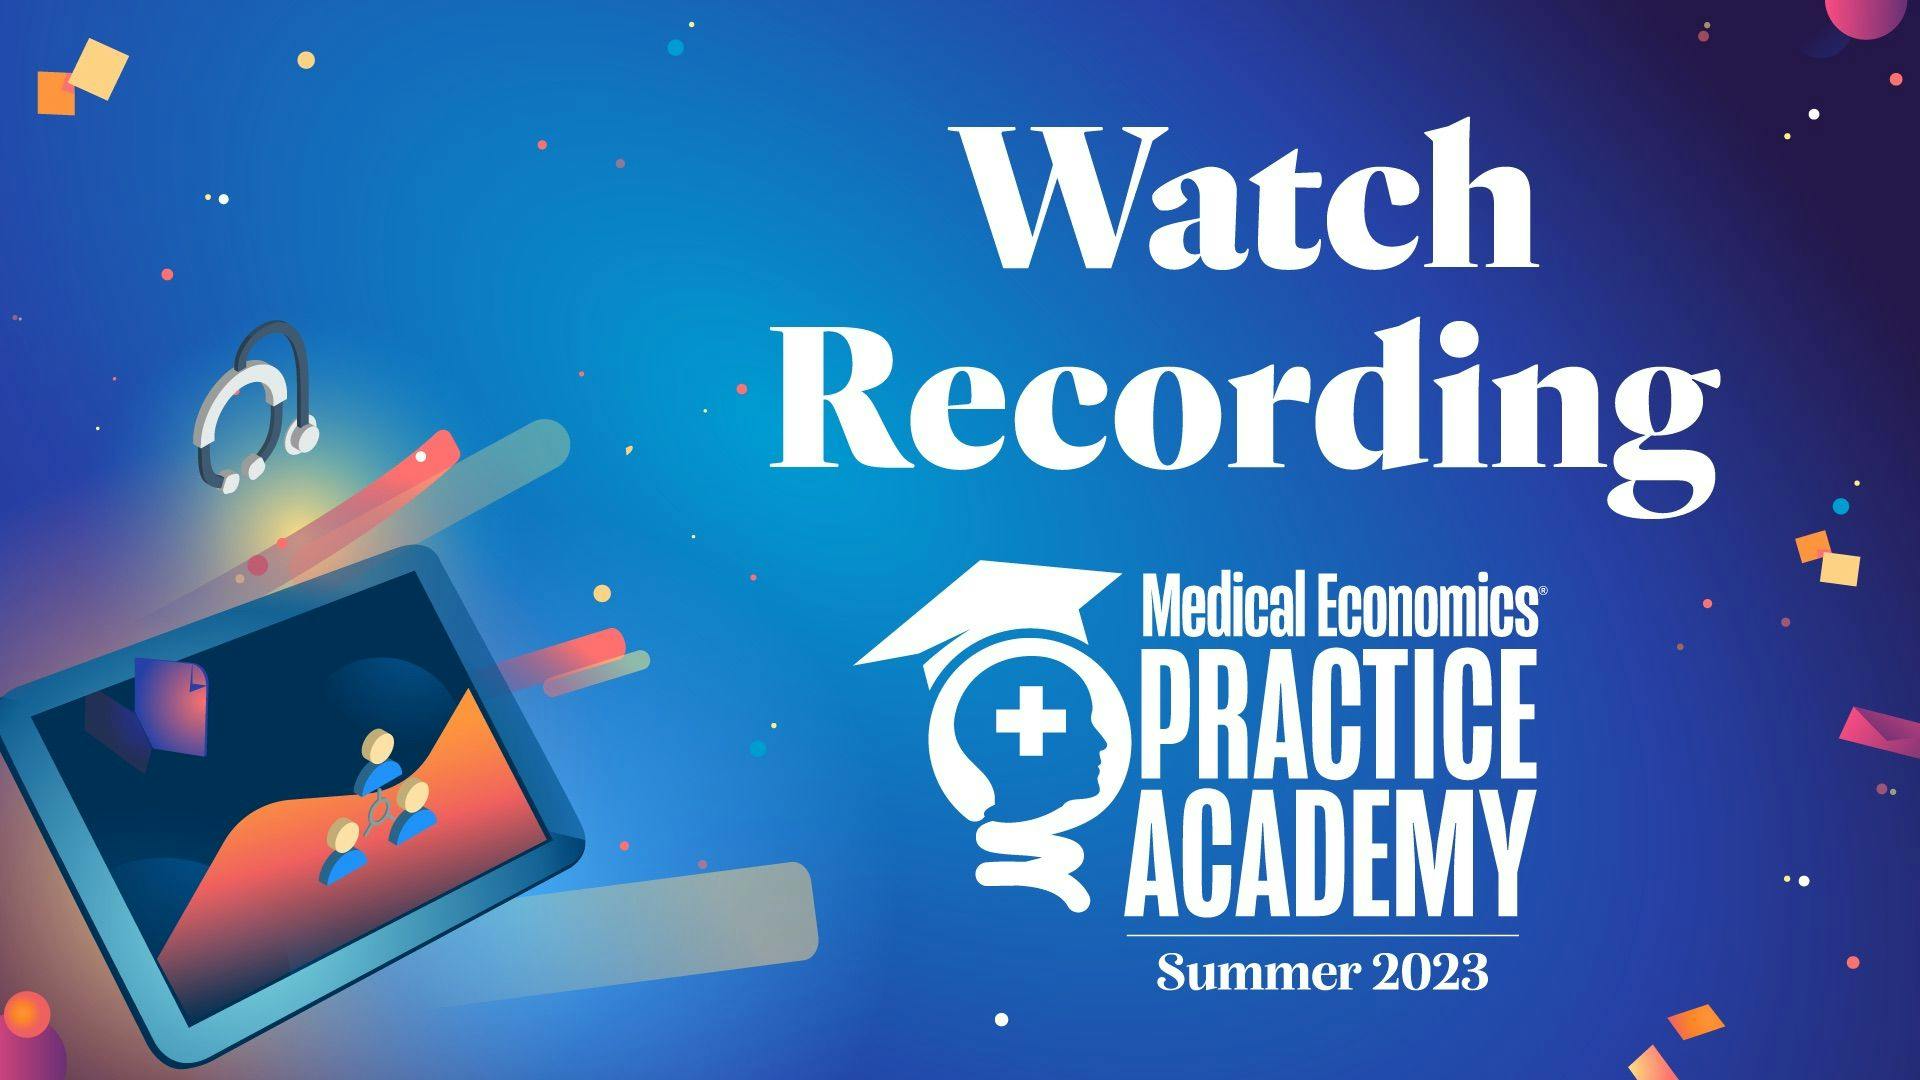 Watch the summer 2023 Practice Academy, now available on demand